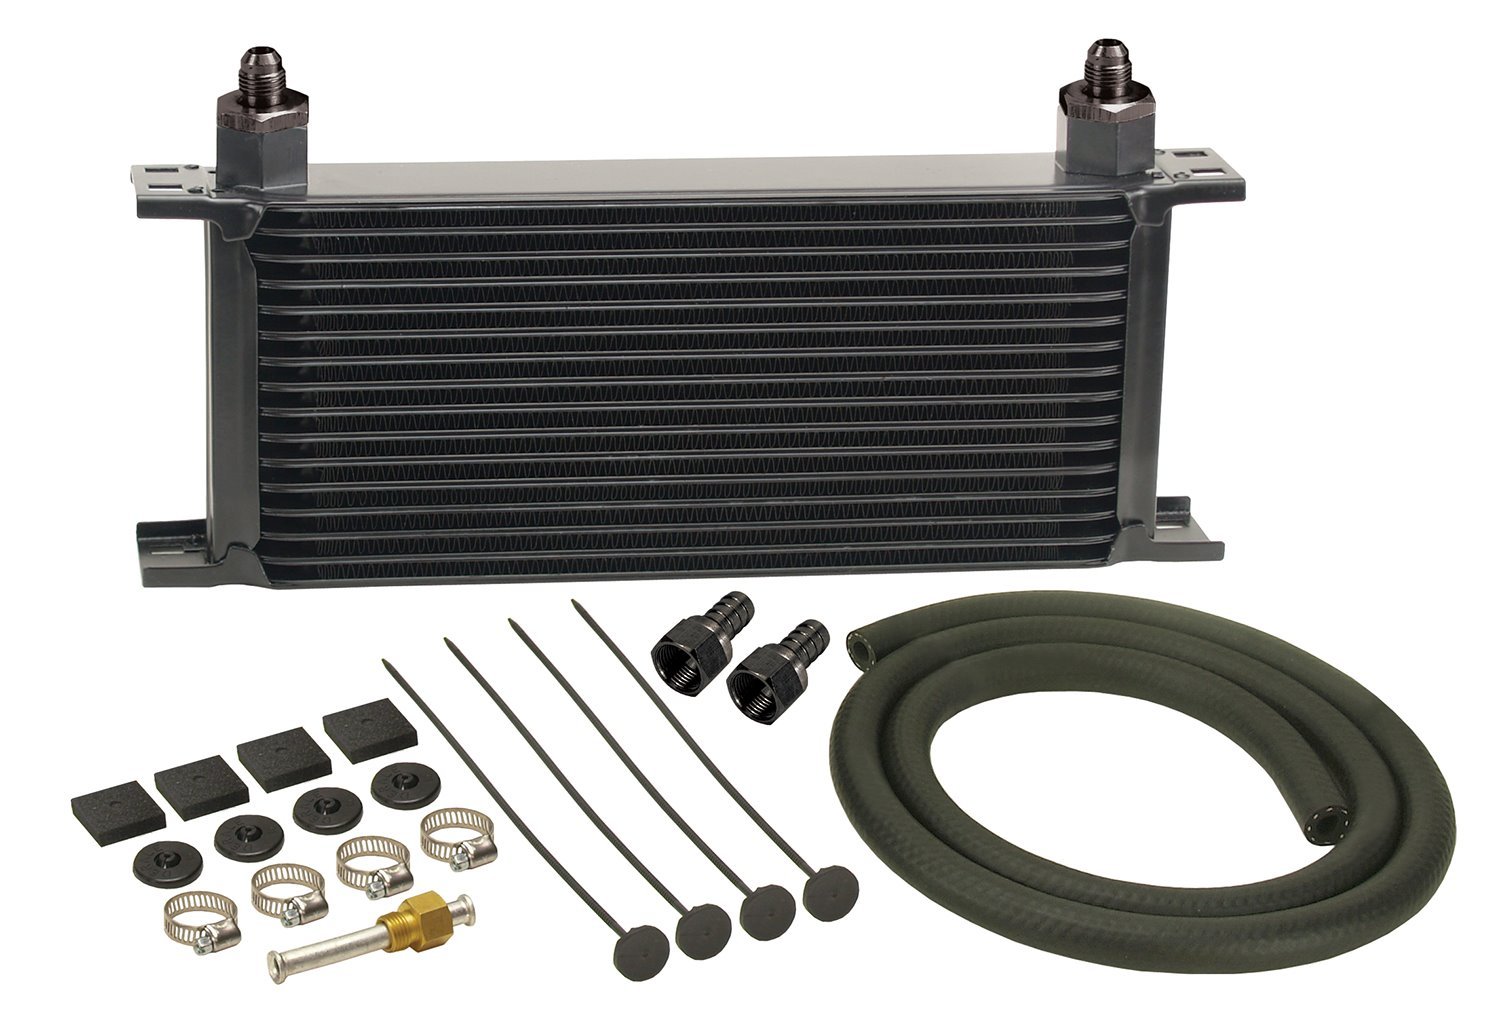 16 Row Stacked Plate Transmission Cooler Kit